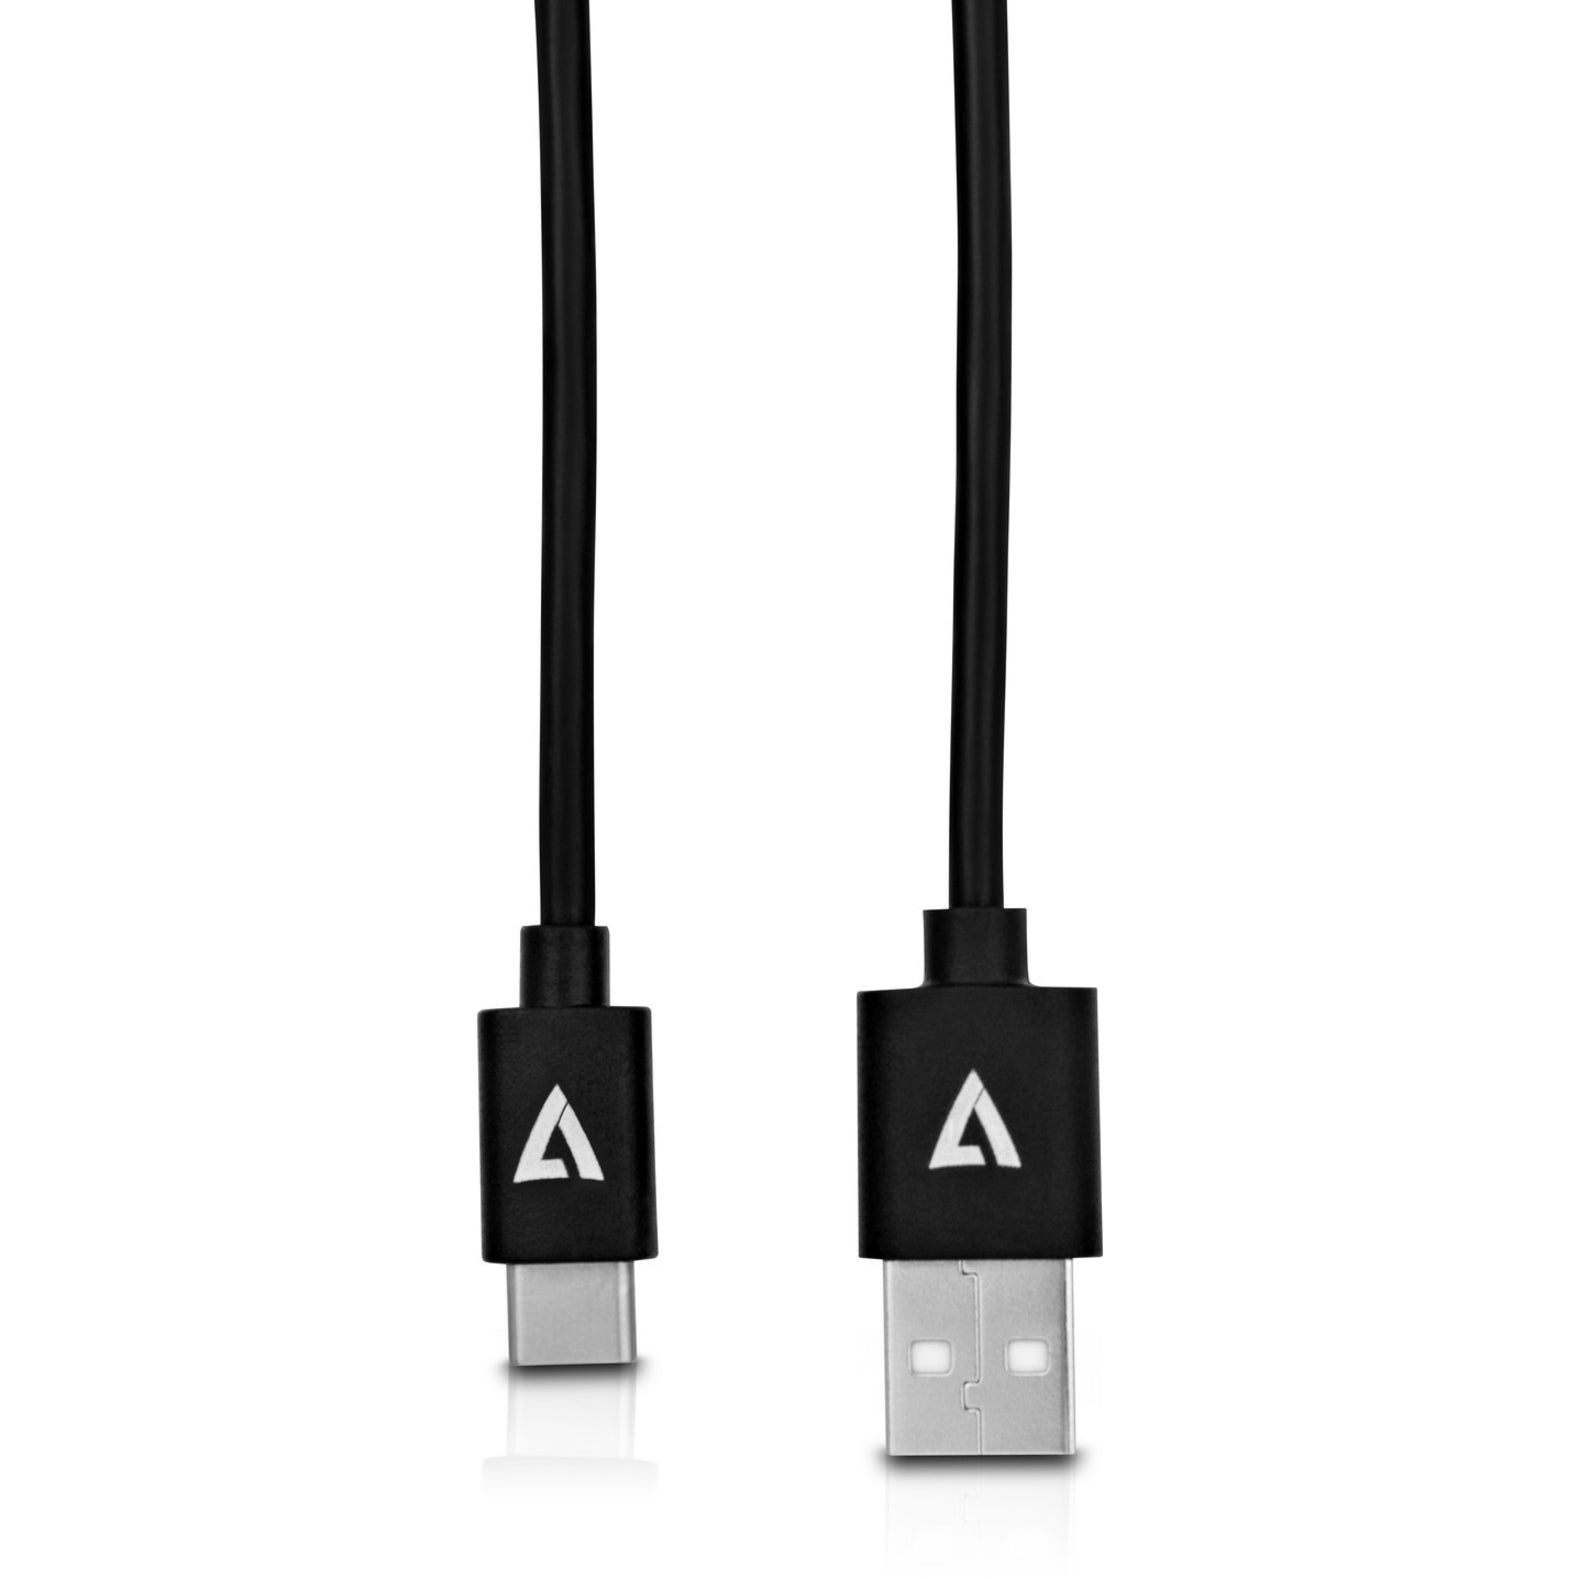 V7 V7U2C-1M-BLK-1E Black USB Cable USB 2.0 A Male to USB-C Male 1m 3.3ft, Corrosion Resistant, EMI/RF Protection